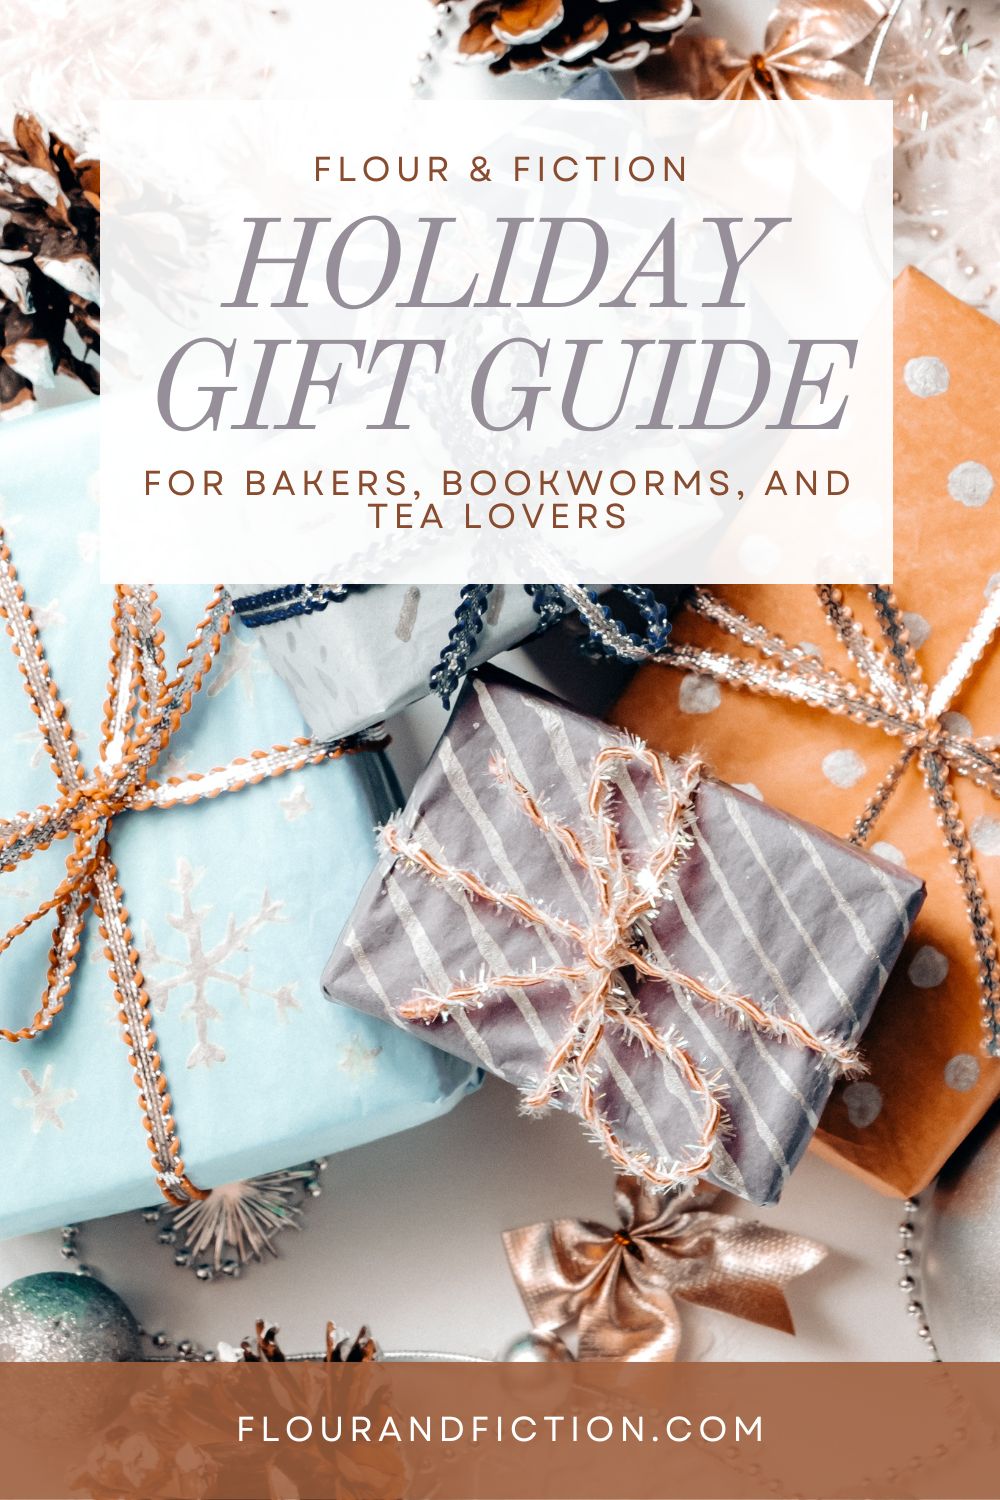 Holiday Gift Guide for Bakers, Bookworms, and Tea lovers